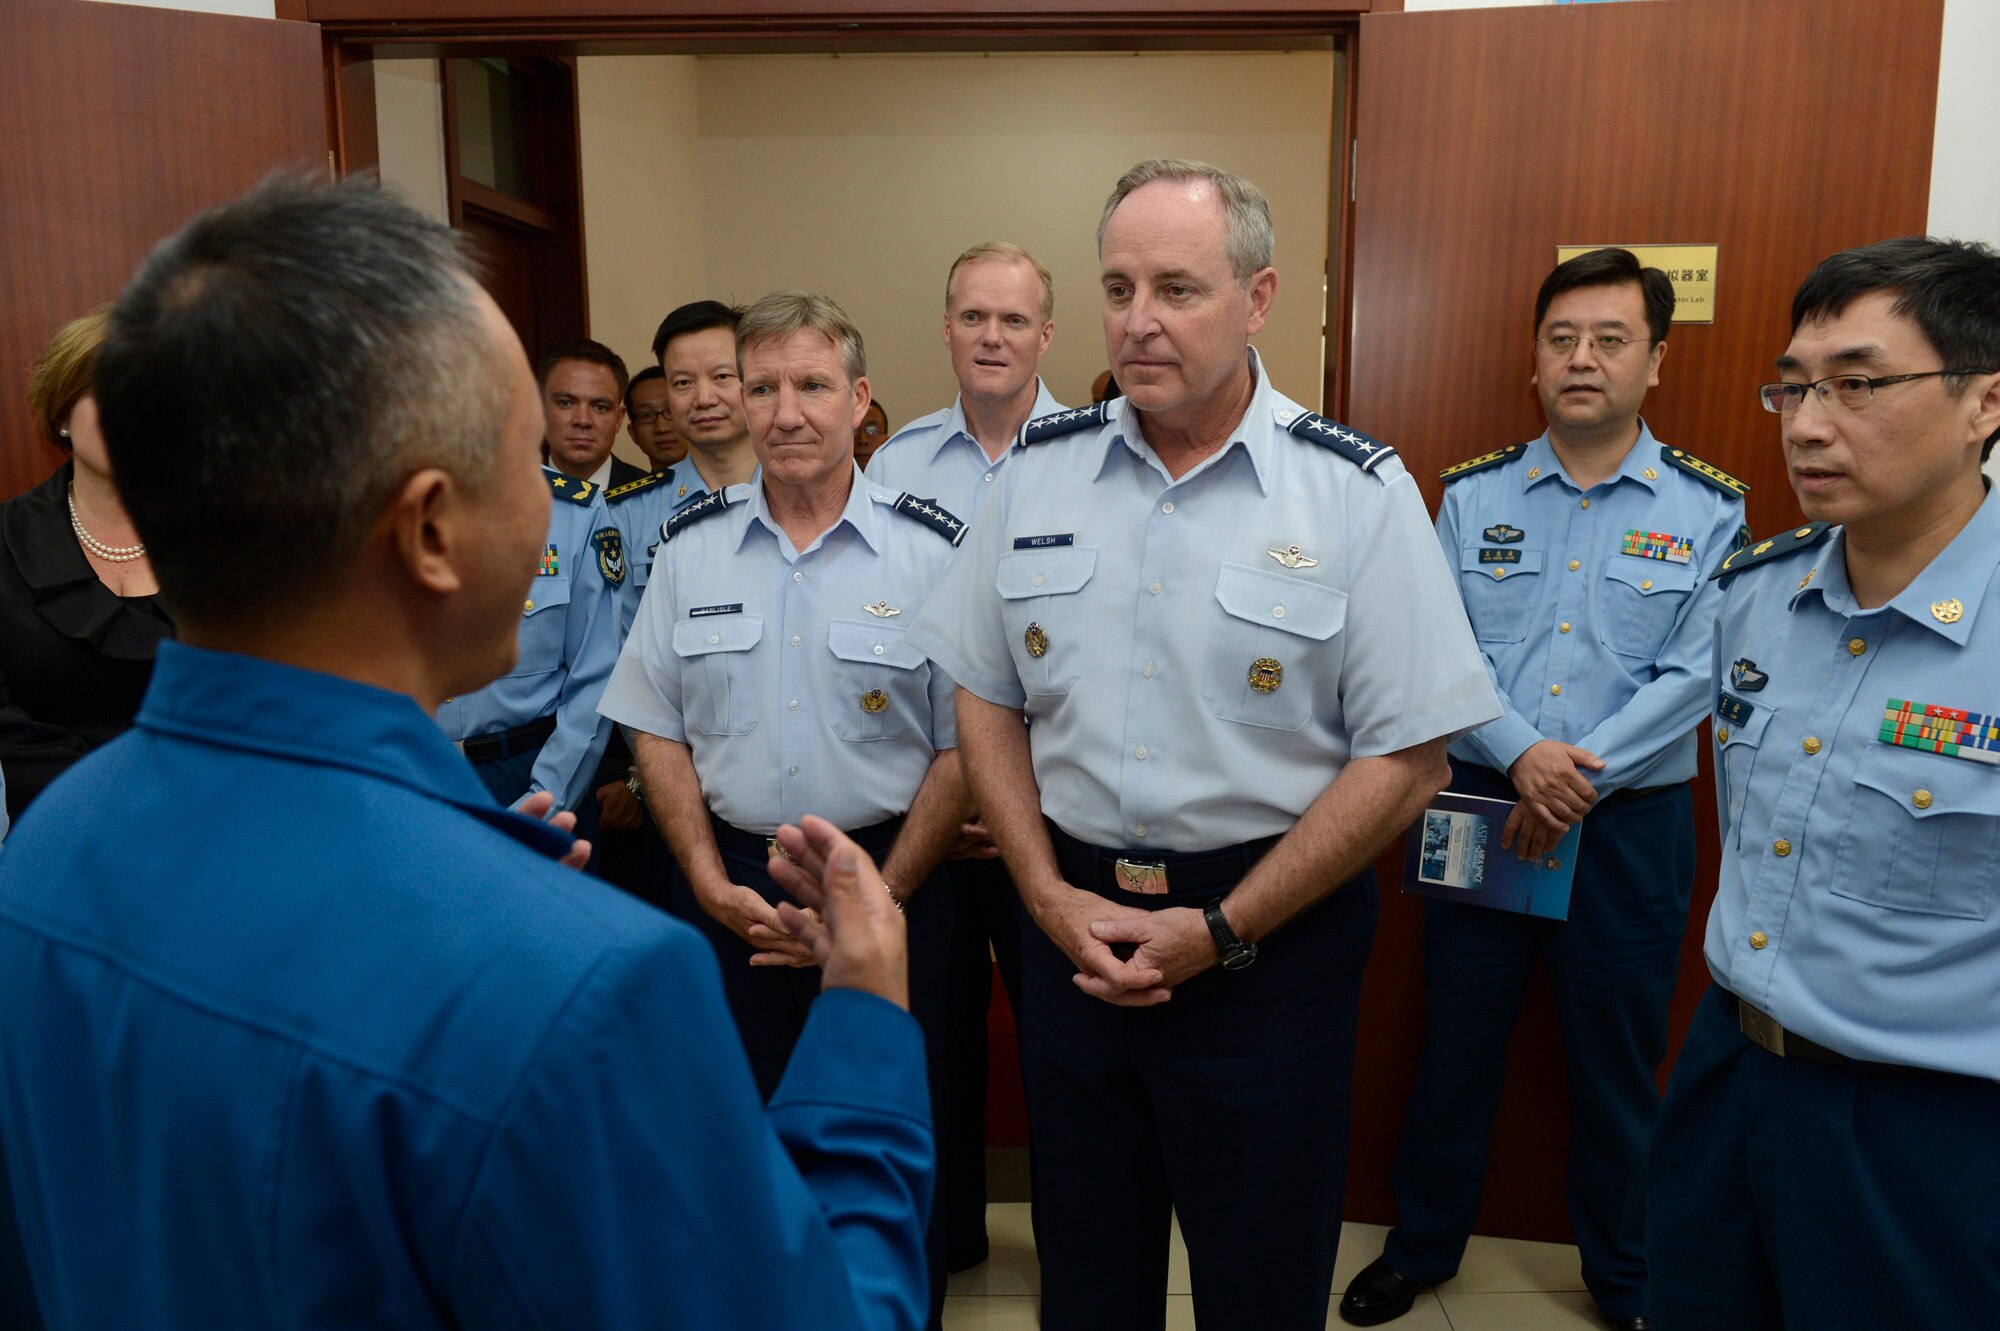 Air Force Chief of Staff Gen. Mark A. Welsh III, Gen. Herbert "Hawk" Carlisle, Pacific Air Forces commander, and Chief Master Sgt. of the Air Force James A. Cody, receive a tour of of the Chinese Air Force Aviation Medicine Research Institute, in Beijing, China, Sept. 25, 2013.  Welsh, Carlisle and Cody will visit with various military leaders as part of a weeklong visit. 